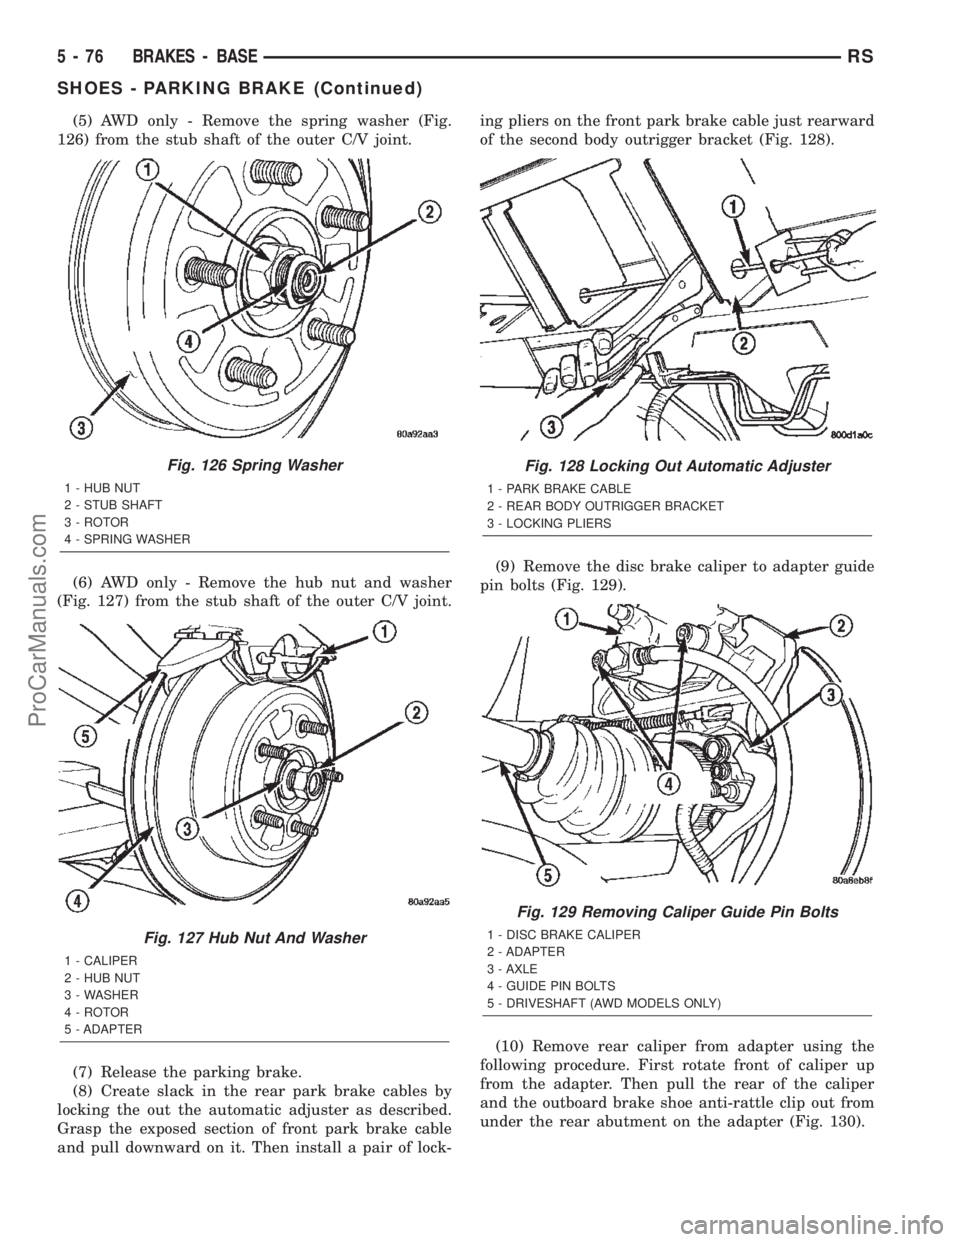 CHRYSLER TOWN AND COUNTRY 2002  Service Manual (5) AWD only - Remove the spring washer (Fig.
126) from the stub shaft of the outer C/V joint.
(6) AWD only - Remove the hub nut and washer
(Fig. 127) from the stub shaft of the outer C/V joint.
(7) R